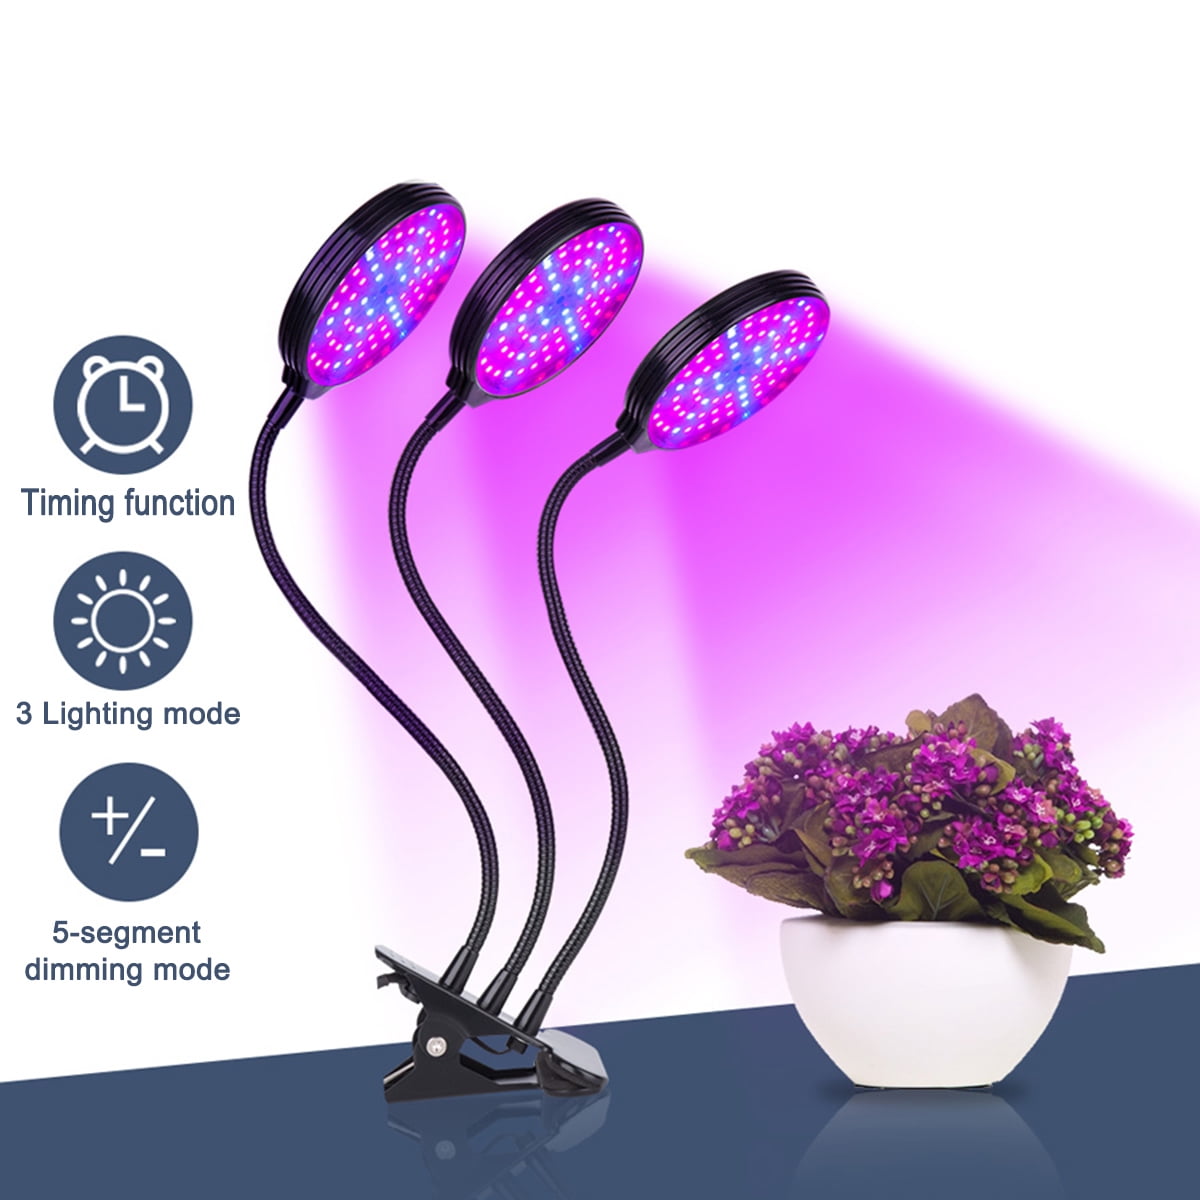 5 Dimmable & Auto On/Off 4/8/12H LED Grow Light Strip Juhefa 60W 3500K Sunlike Full Spectrum Plant Light Bar with 50 White/10 Deep Red Bulbs for Indoor Plants